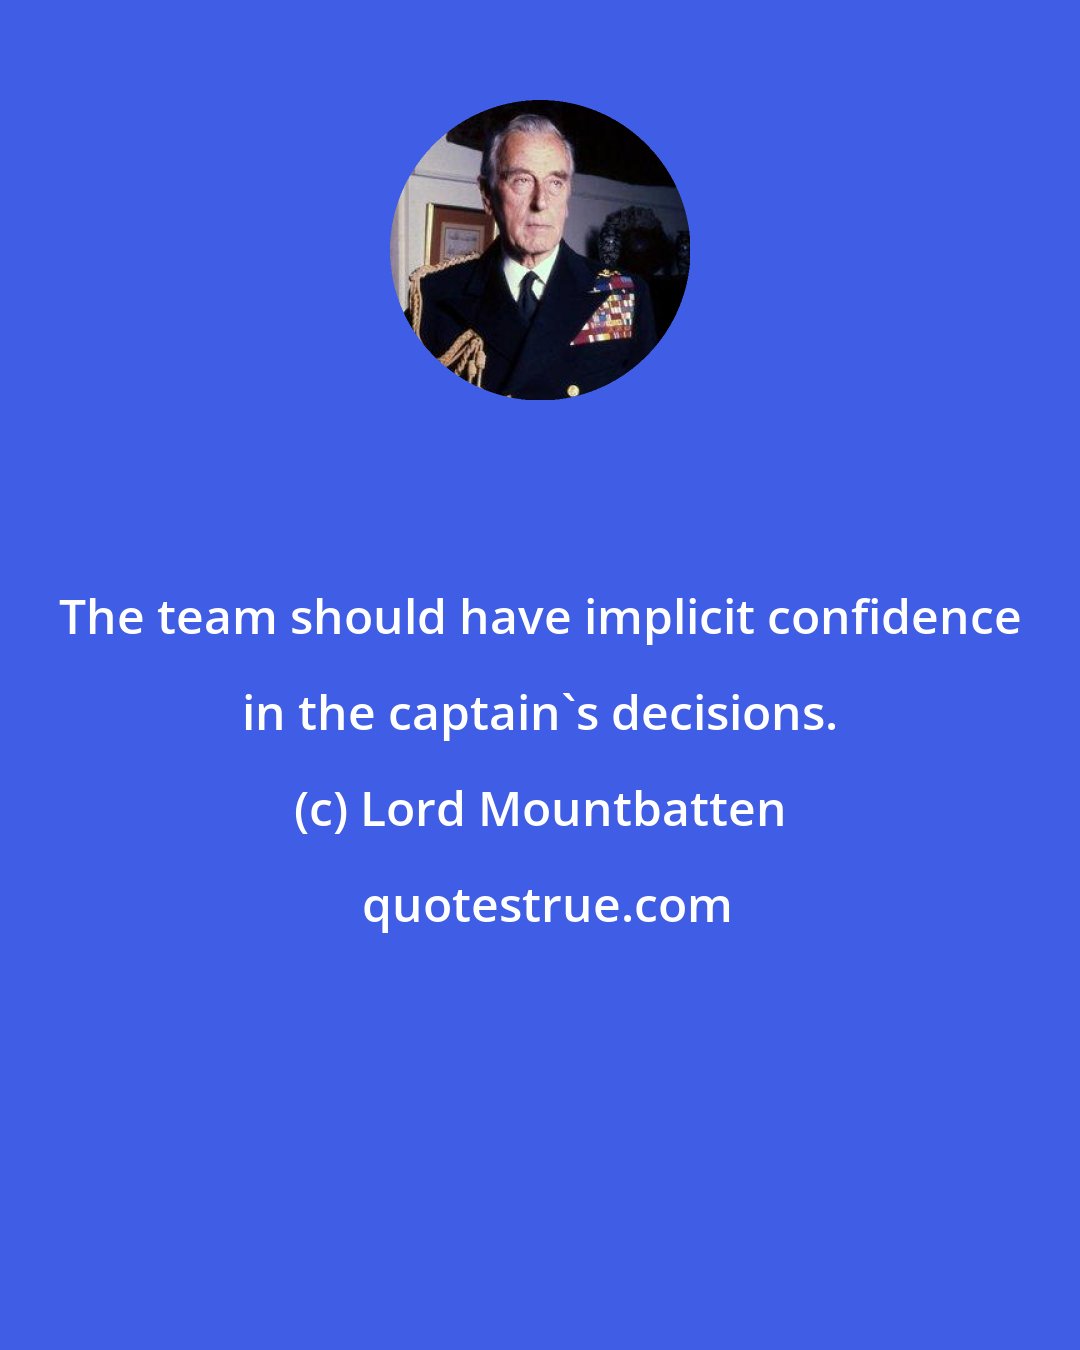 Lord Mountbatten: The team should have implicit confidence in the captain's decisions.